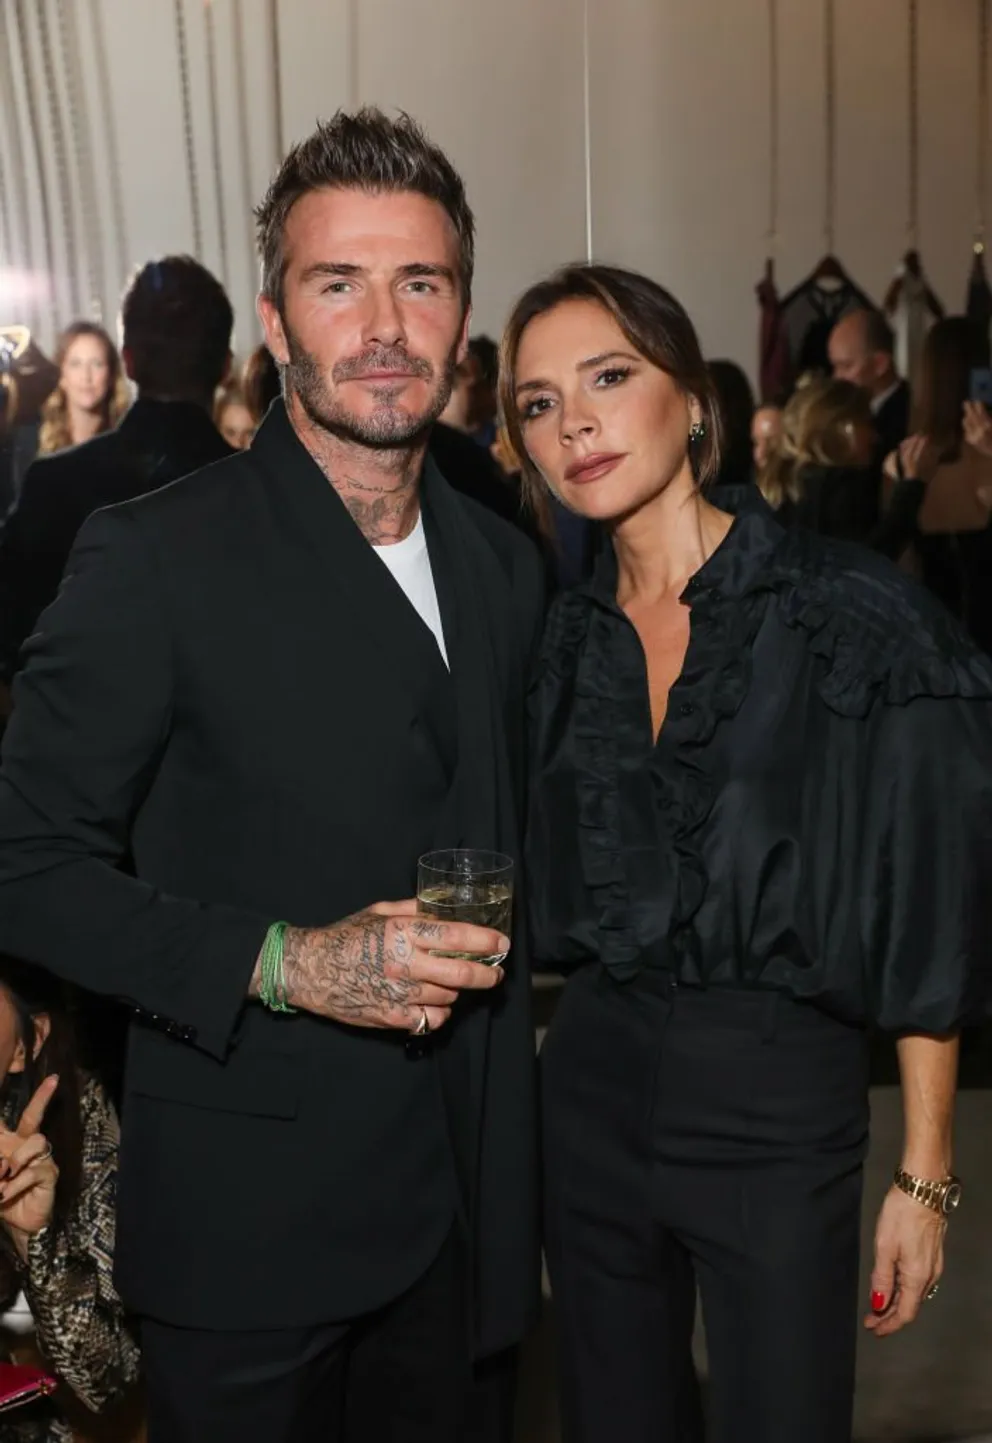 David and Victoria Beckham attend Victoria Beckham and Sotheby's celebration of Andy Warhol with Don Julio 1942 at her Dover Street store, on September 30, 2019 in London, England | Photo: Getty Images